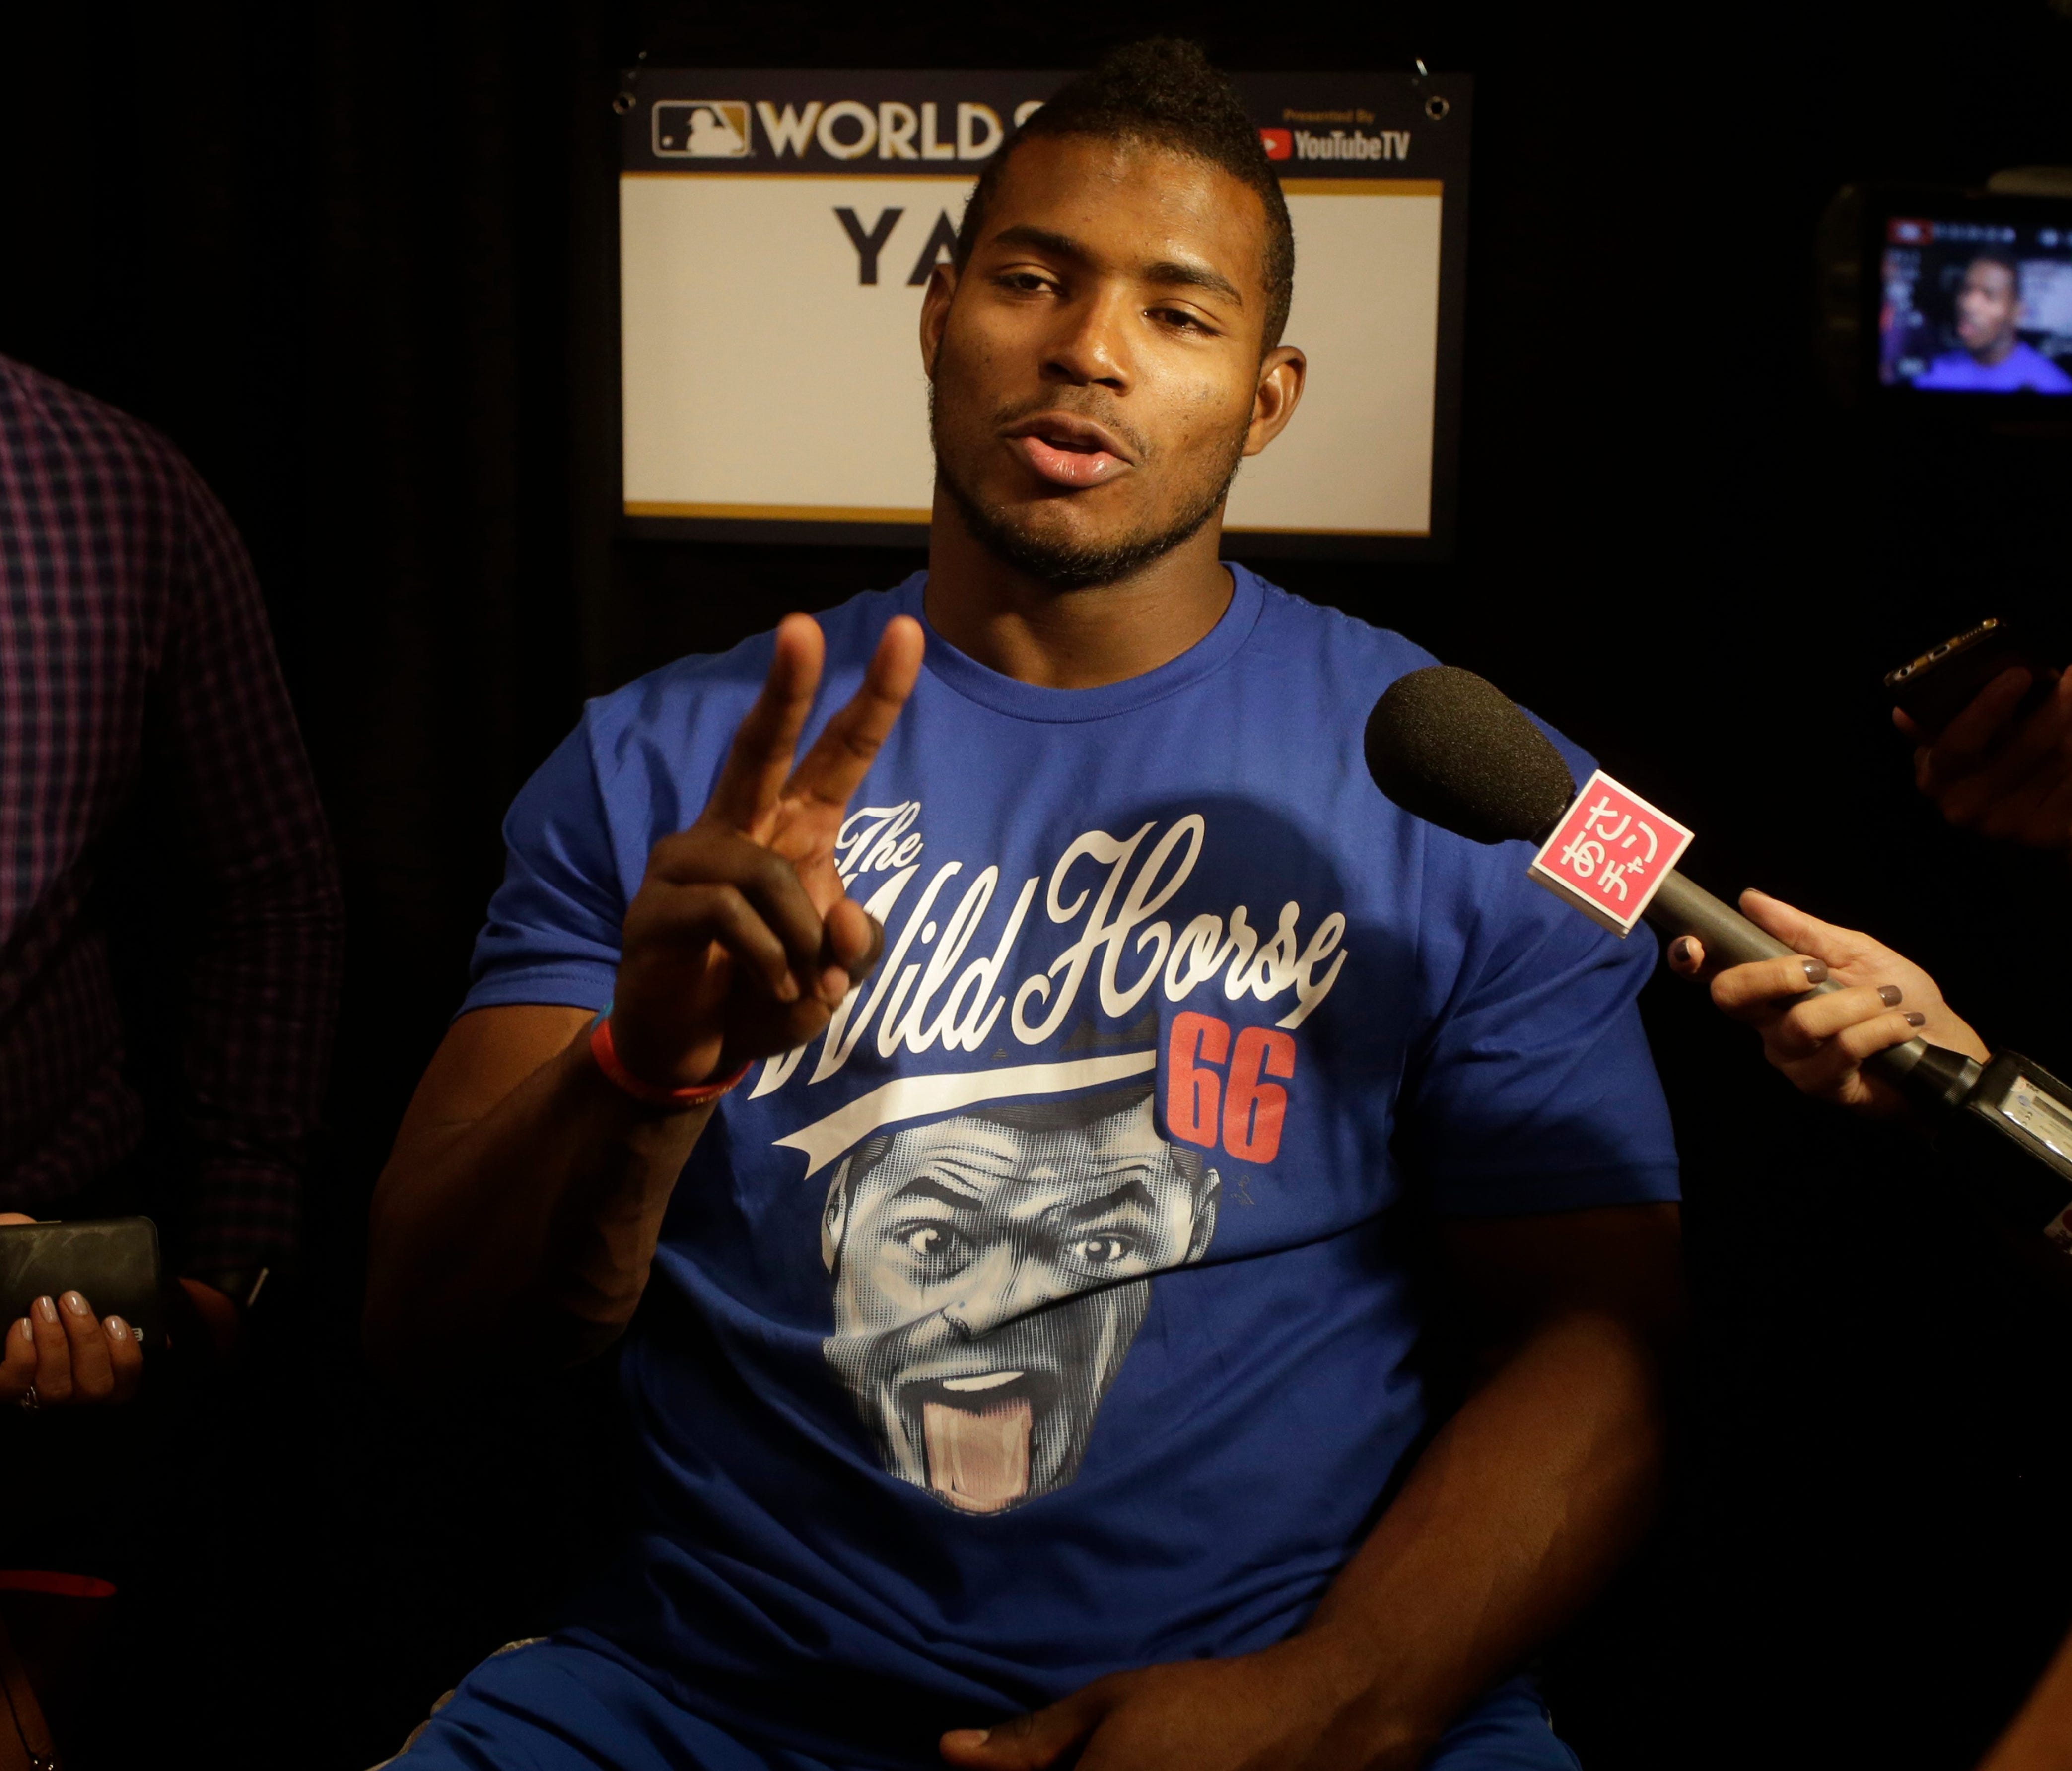 Yasiel Puig took the World Series stage with his personal brand stronger than ever.